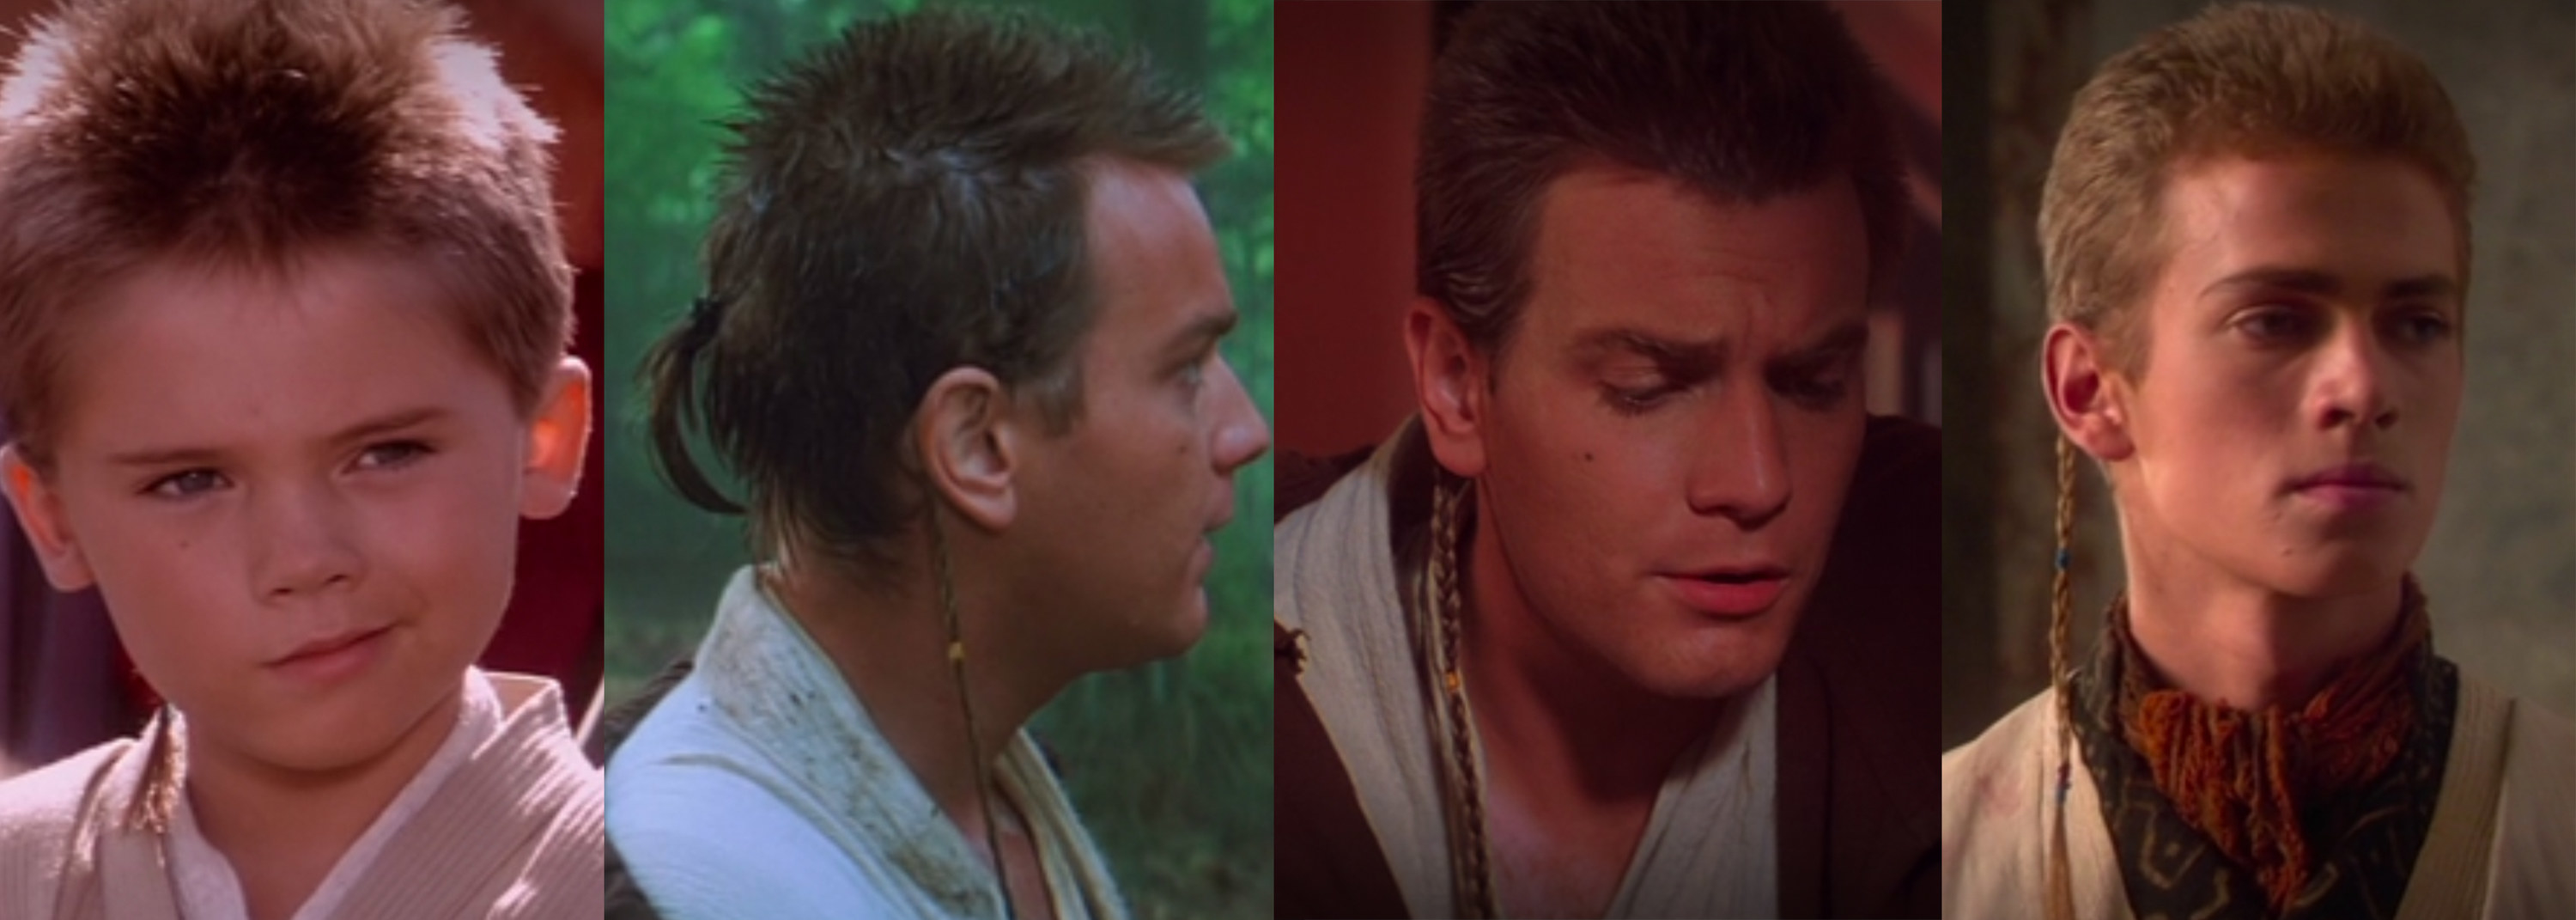 Left: Jake Lloyd as Anakin Skywalker looks on in &quot;The Phantom Menace&quot; Middle: Ewan McGregor as Obi-Wan Kenobi with a small ponytail and braid in &quot;The Phantom Menace&quot; Right: Hayden Christensen as Anakin Skywalker with a braid in &quot;Attack of the Clones&quot;